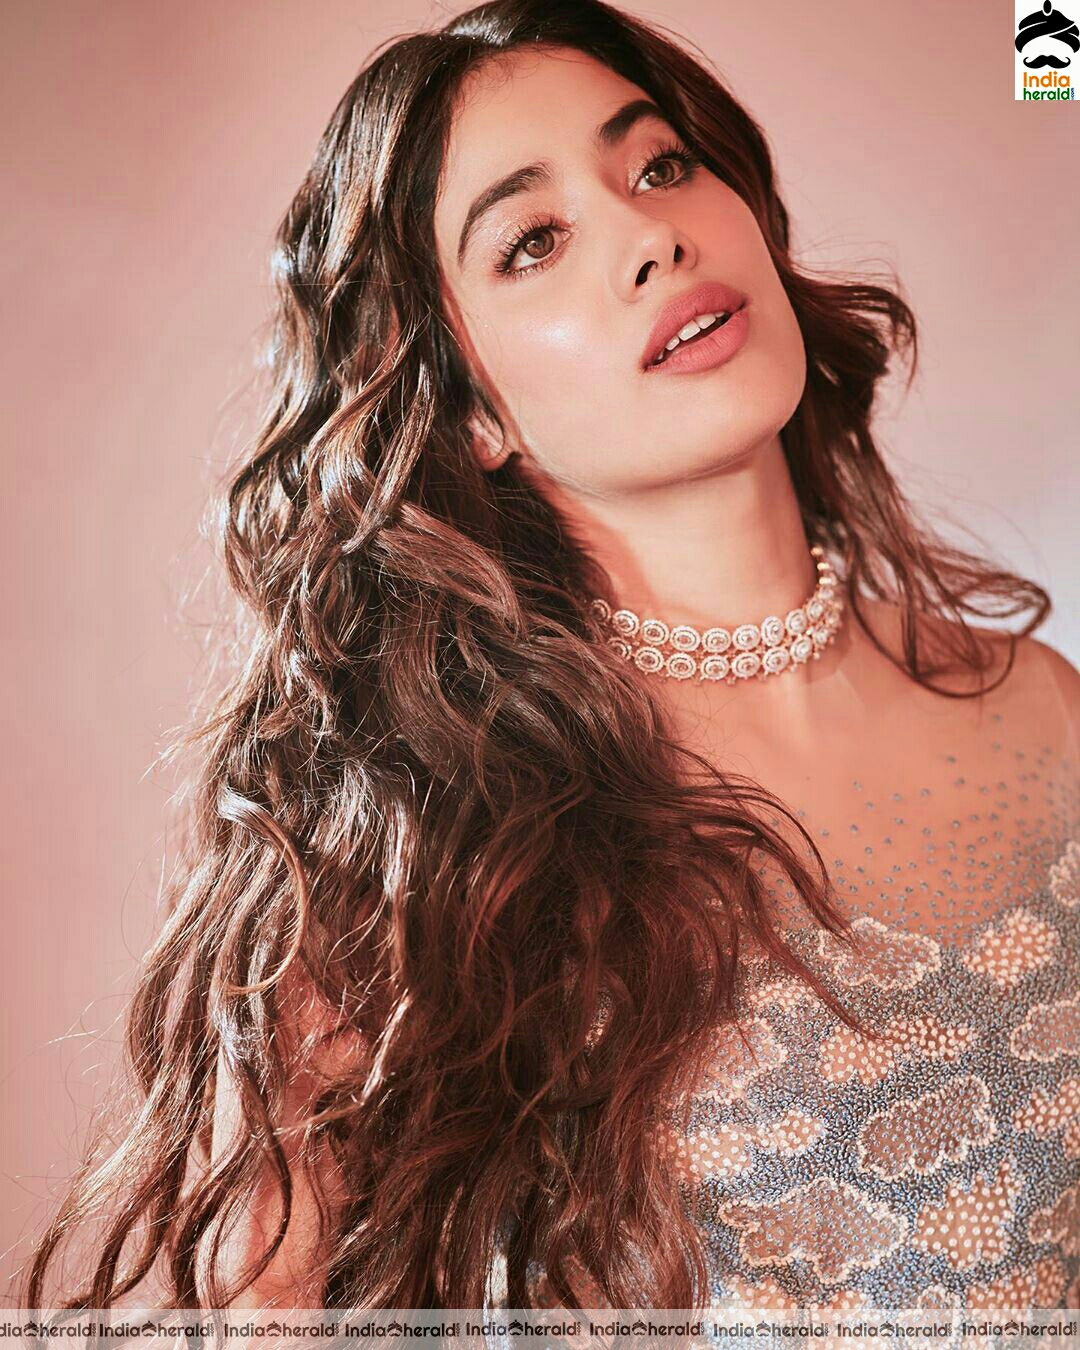 Janhvi Kapoor Looking Like a Golden Girl In These Latest Photos